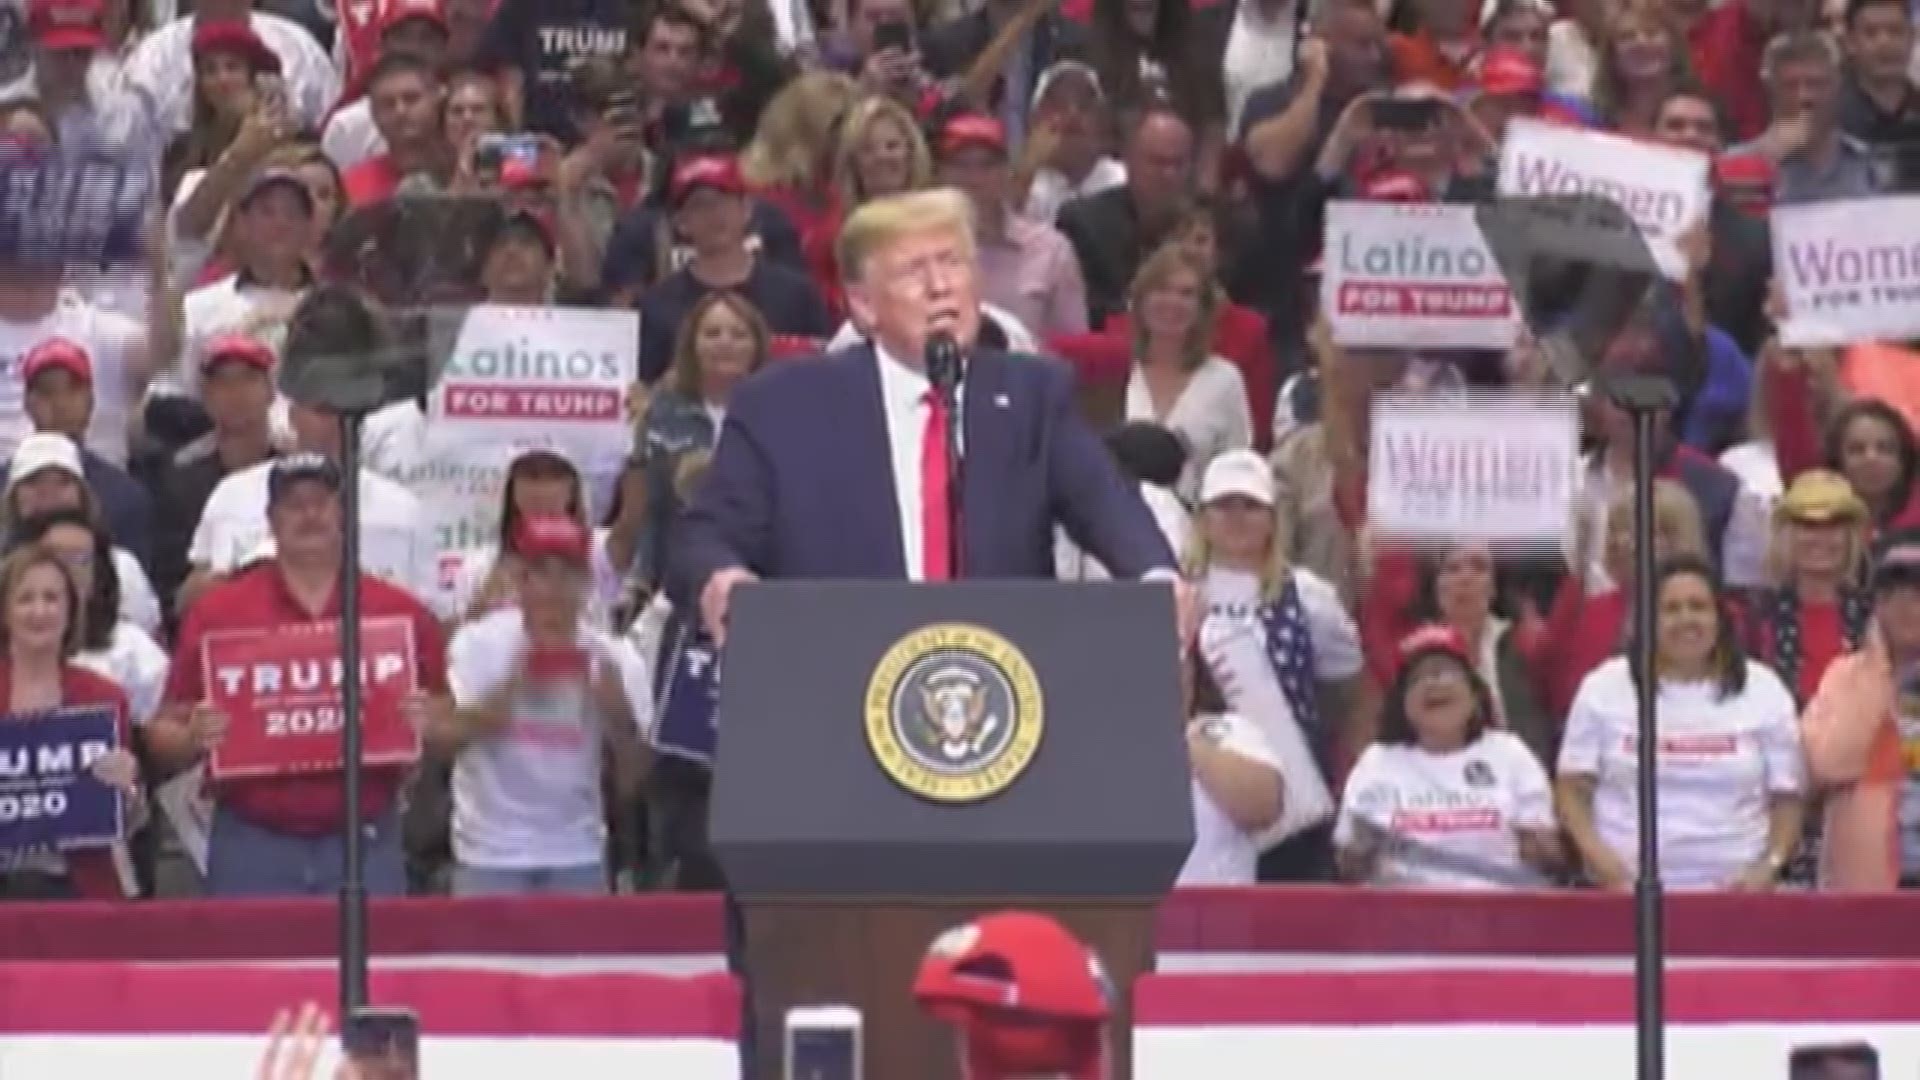 President Trump said he was thrilled to be in Texas when he spoke to an enthusiastic crowd Thursday in Dallas.